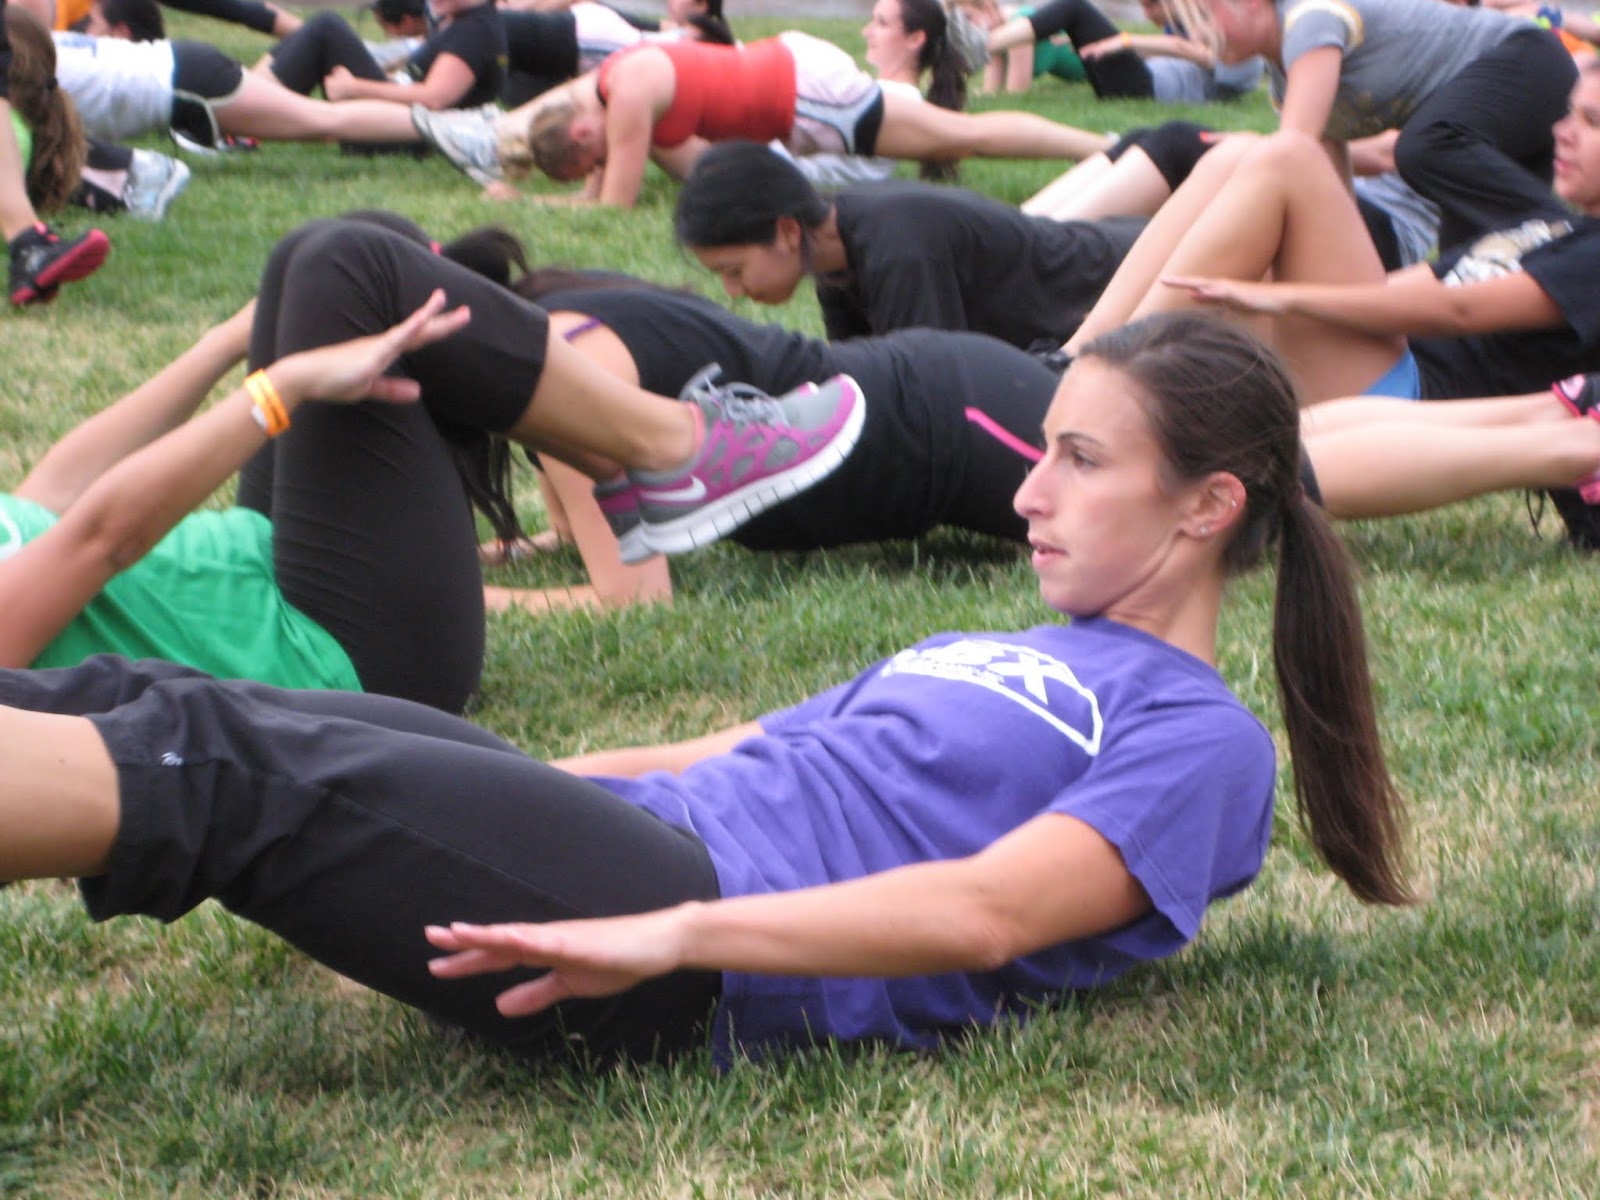 Ultimate Bootcamp - Boston Fitness: Photos from Free Boston Boot Camp ...